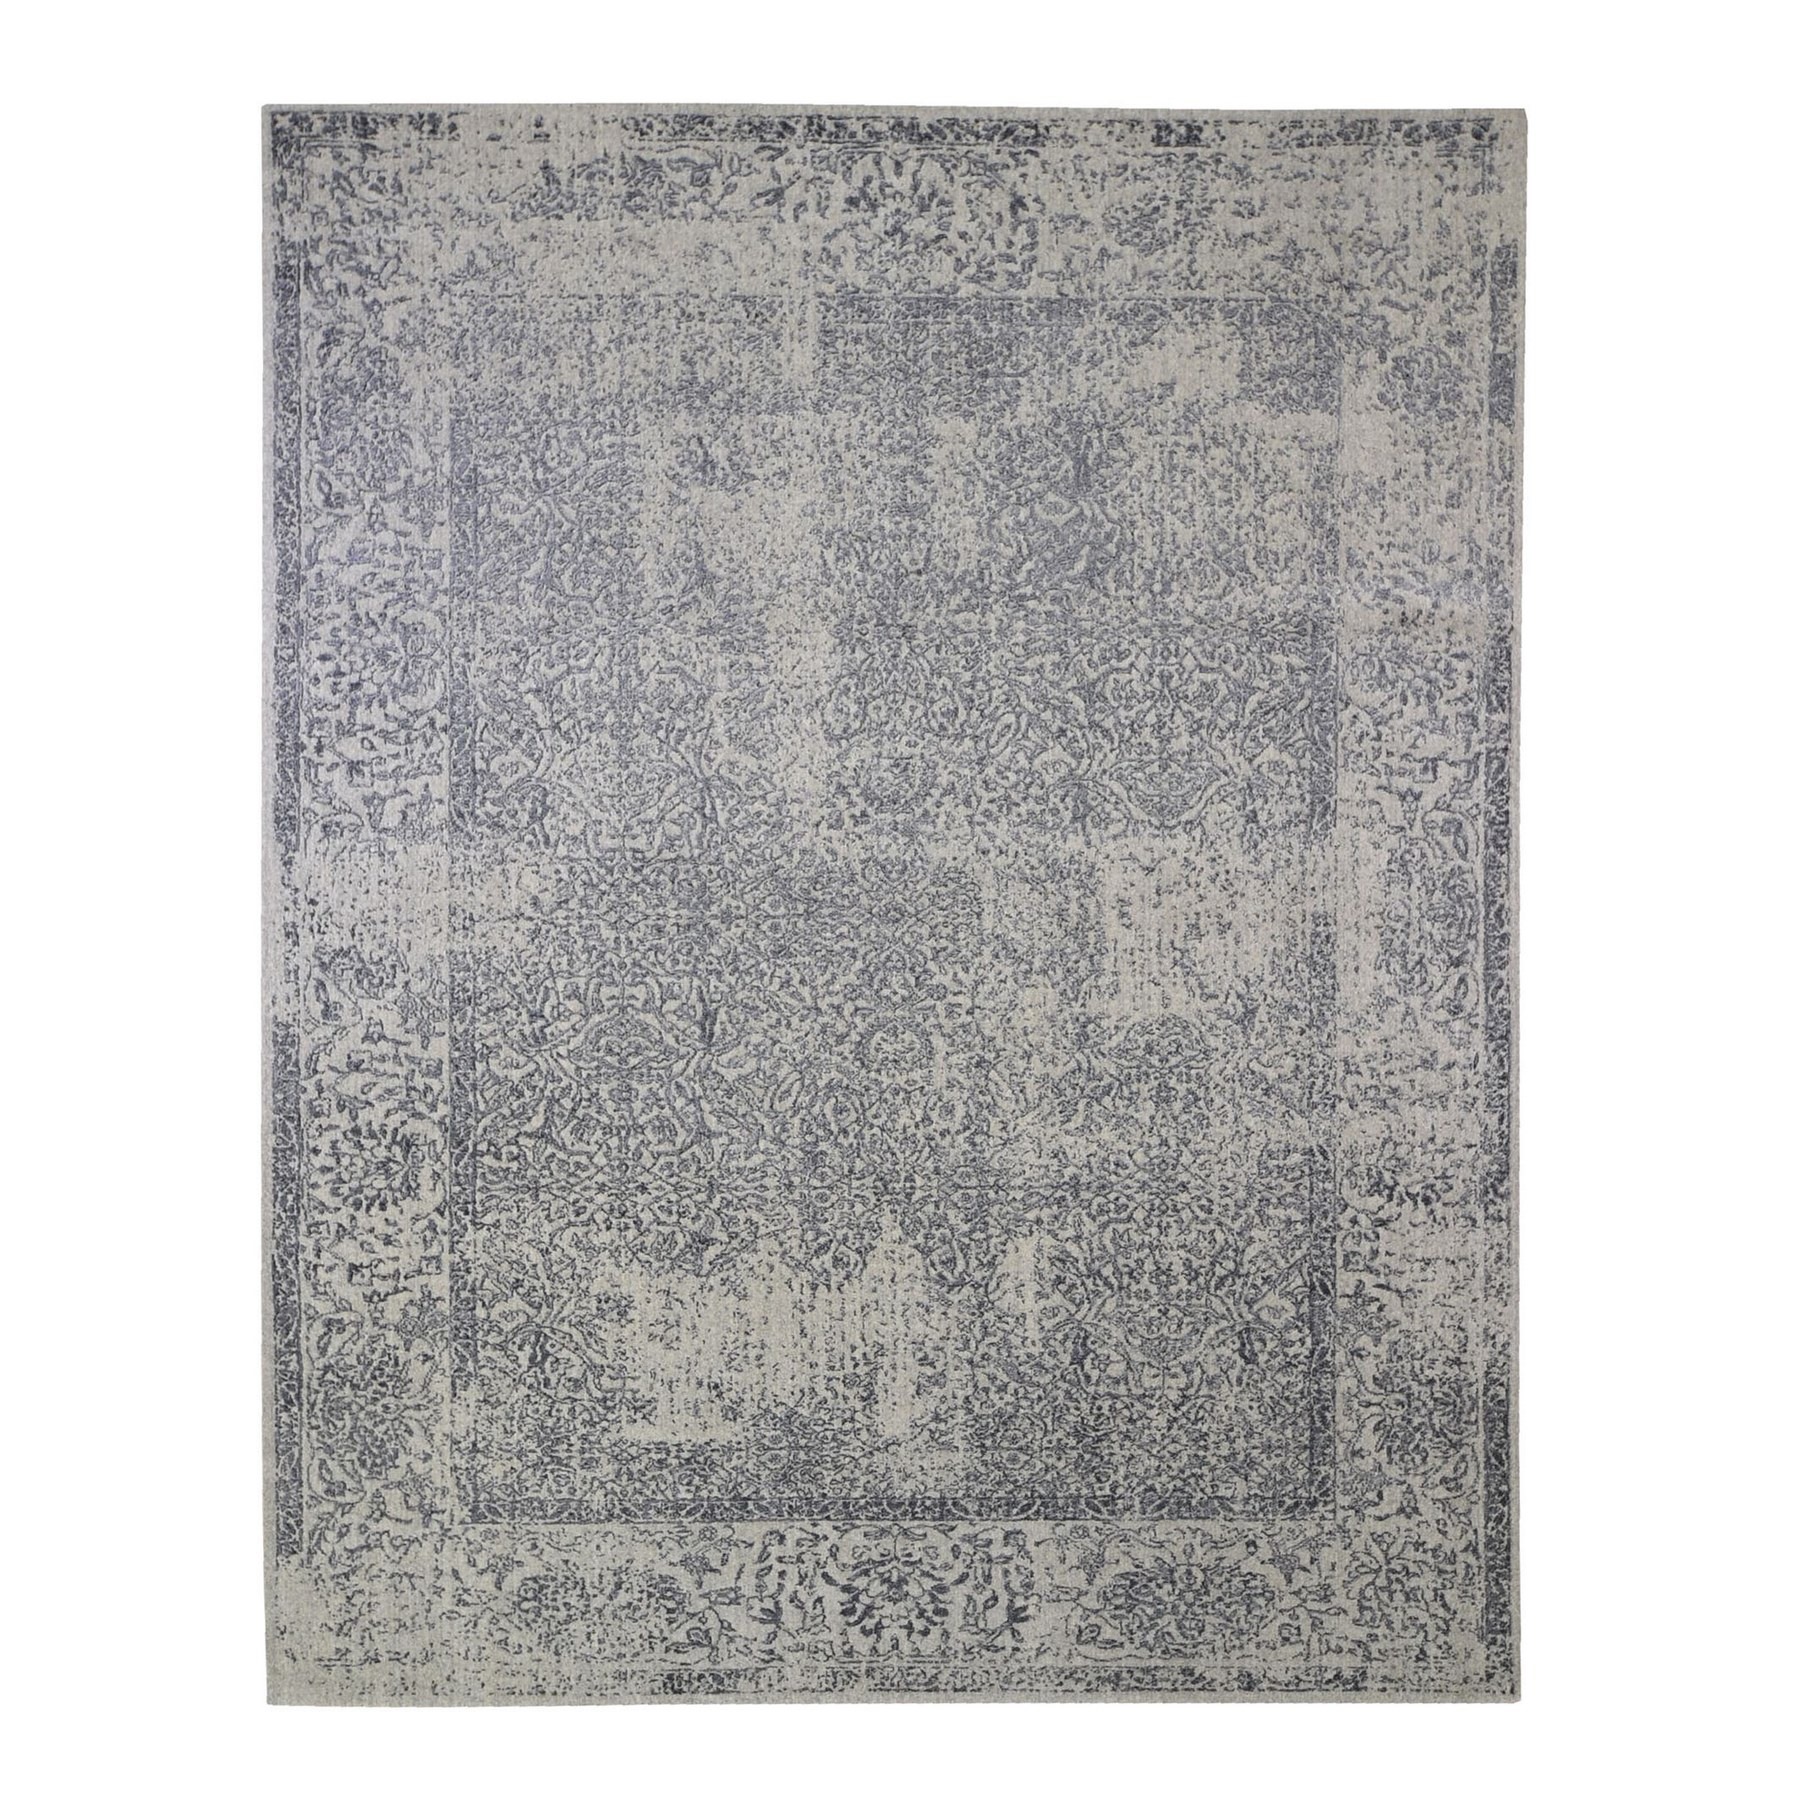 Mid Century Modern Collection Hand Loomed Grey Rug No: 1132876